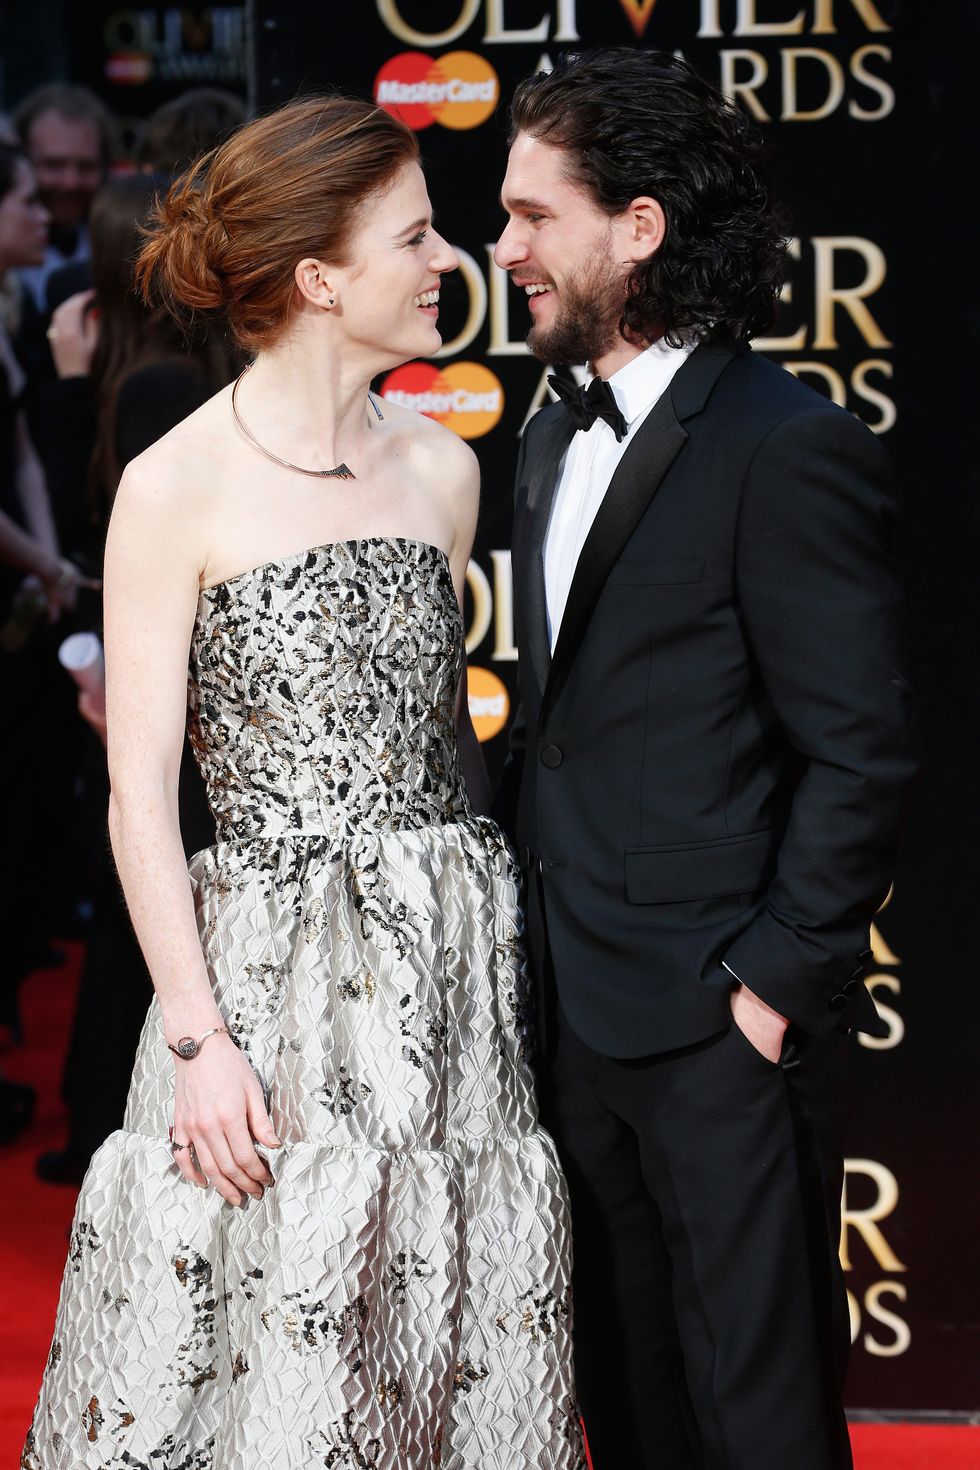 LONDON, ENGLAND - APRIL 03:  Rose Leslie and Kit Harington attend The Olivier Awards with Mastercard at The Royal Opera House on April 3, 2016 in London, England.  (Photo by Luca Teuchmann/Luca Teuchmann / WireImage)